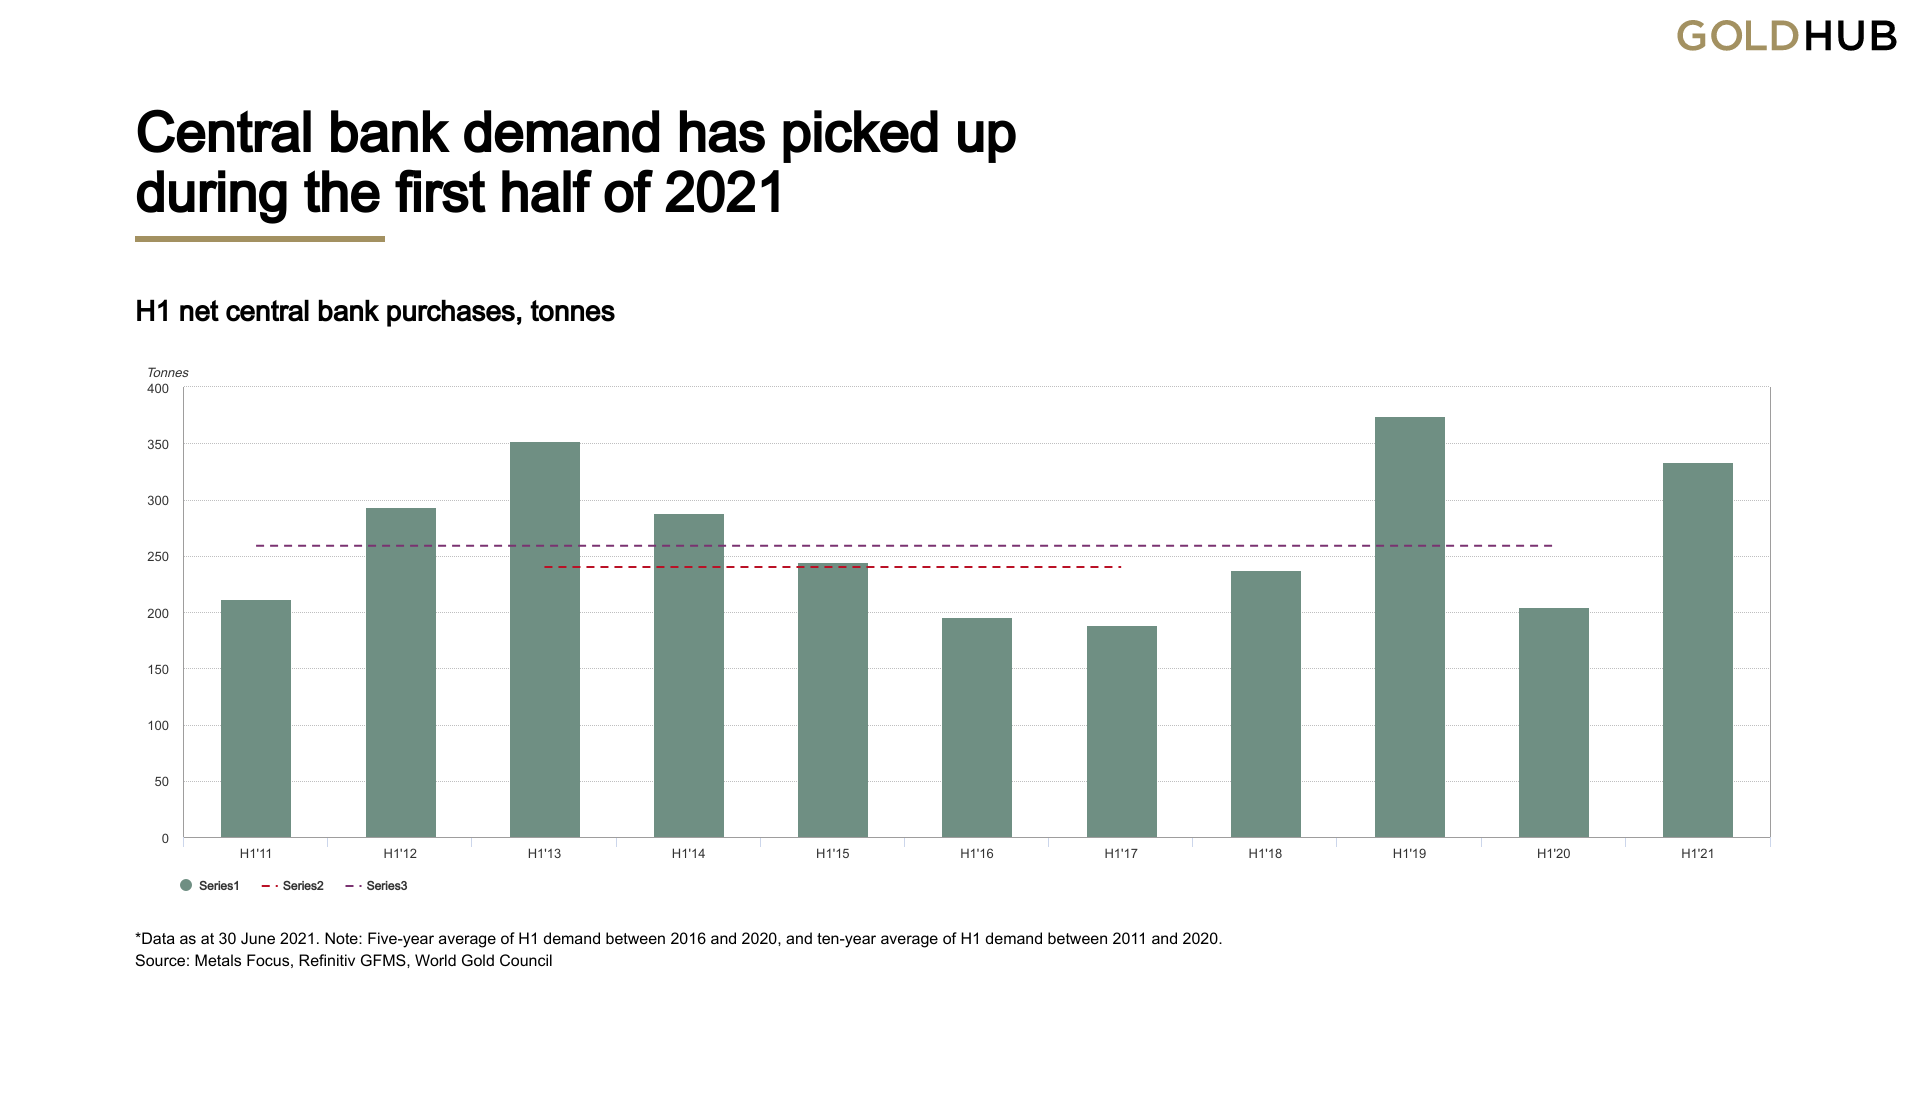 Central bank demand has picked up during the first half of 2021